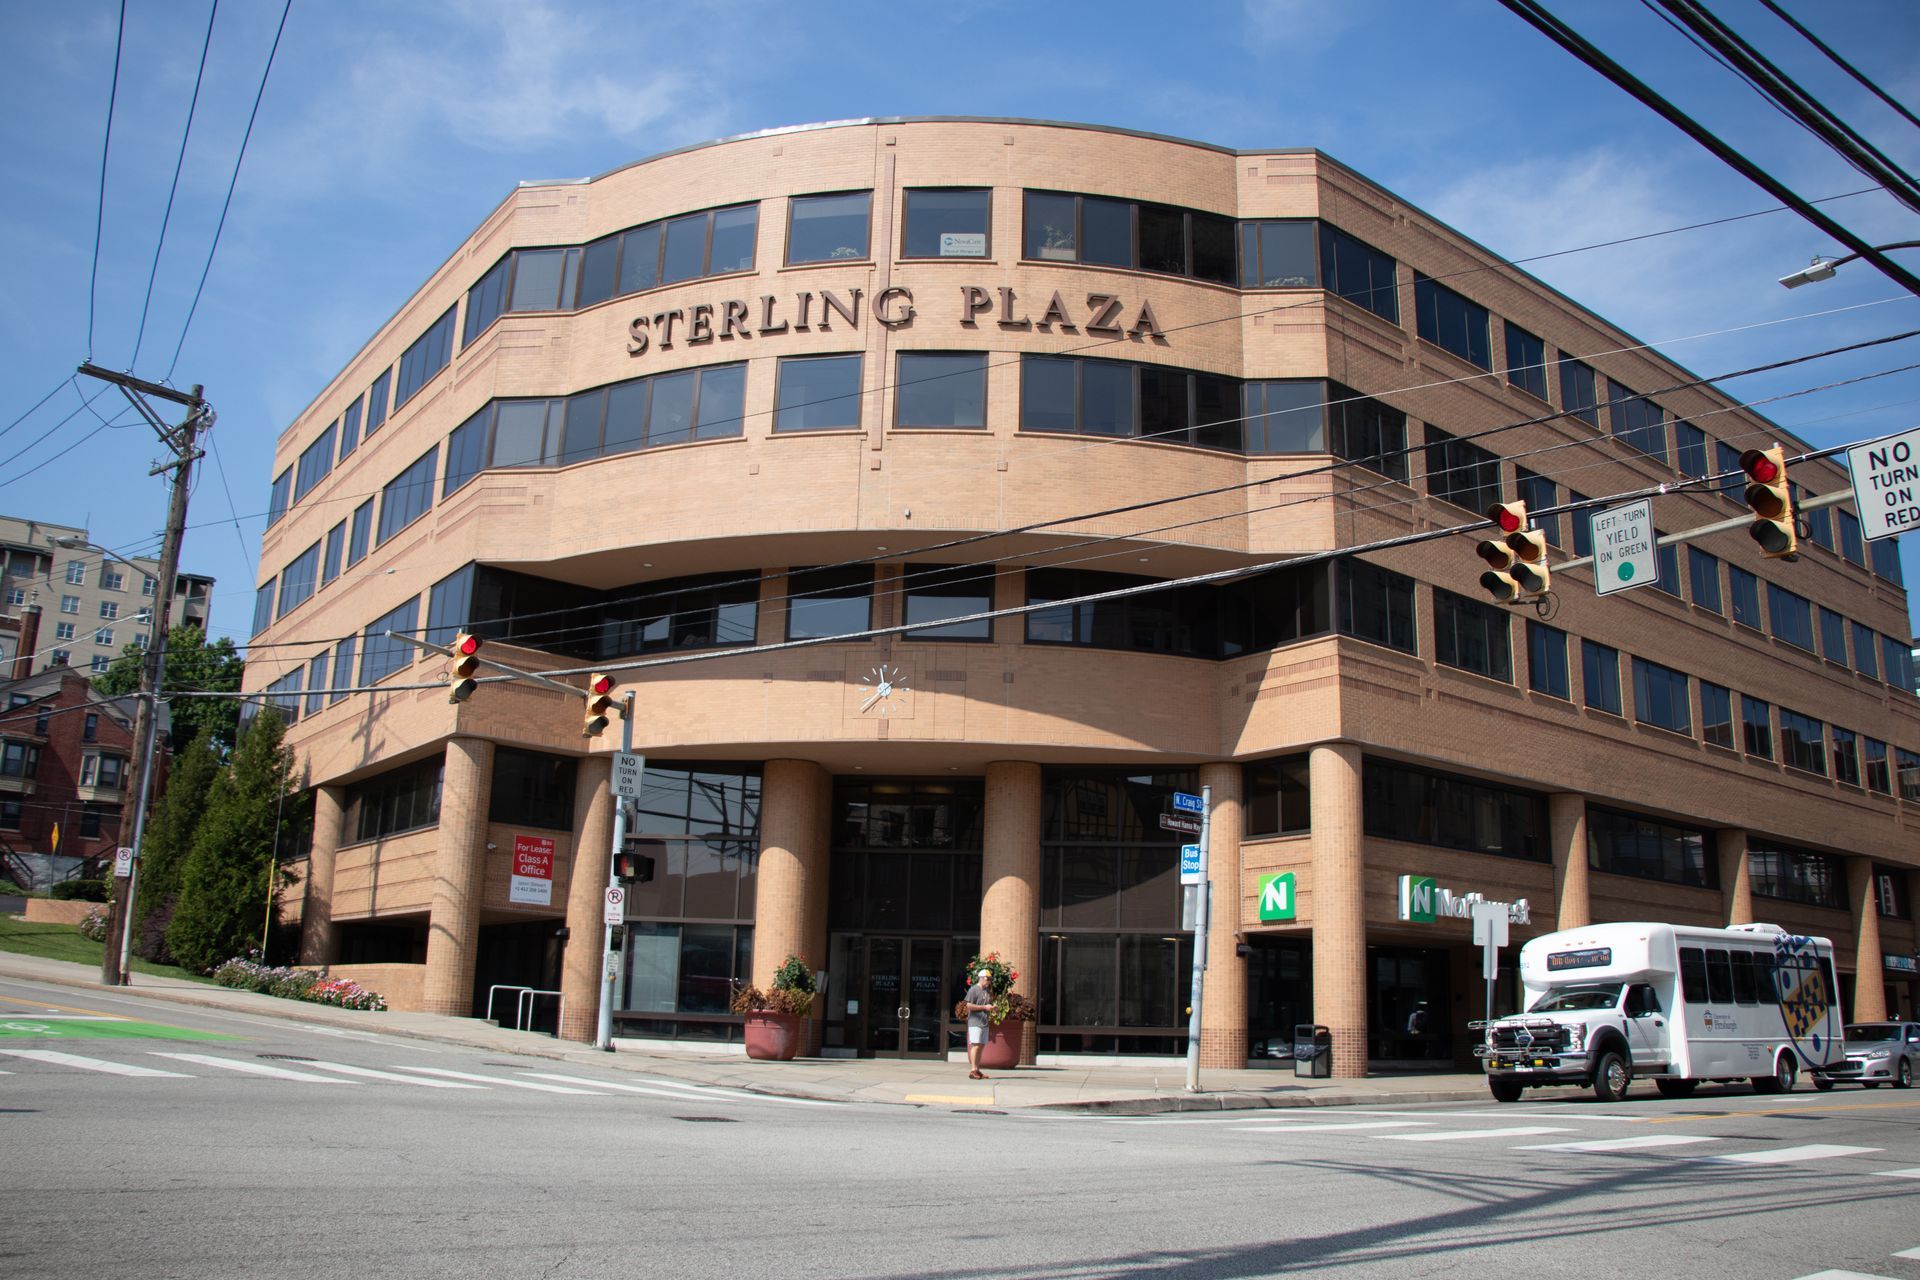 sterling plaza is a large building with lots of windows